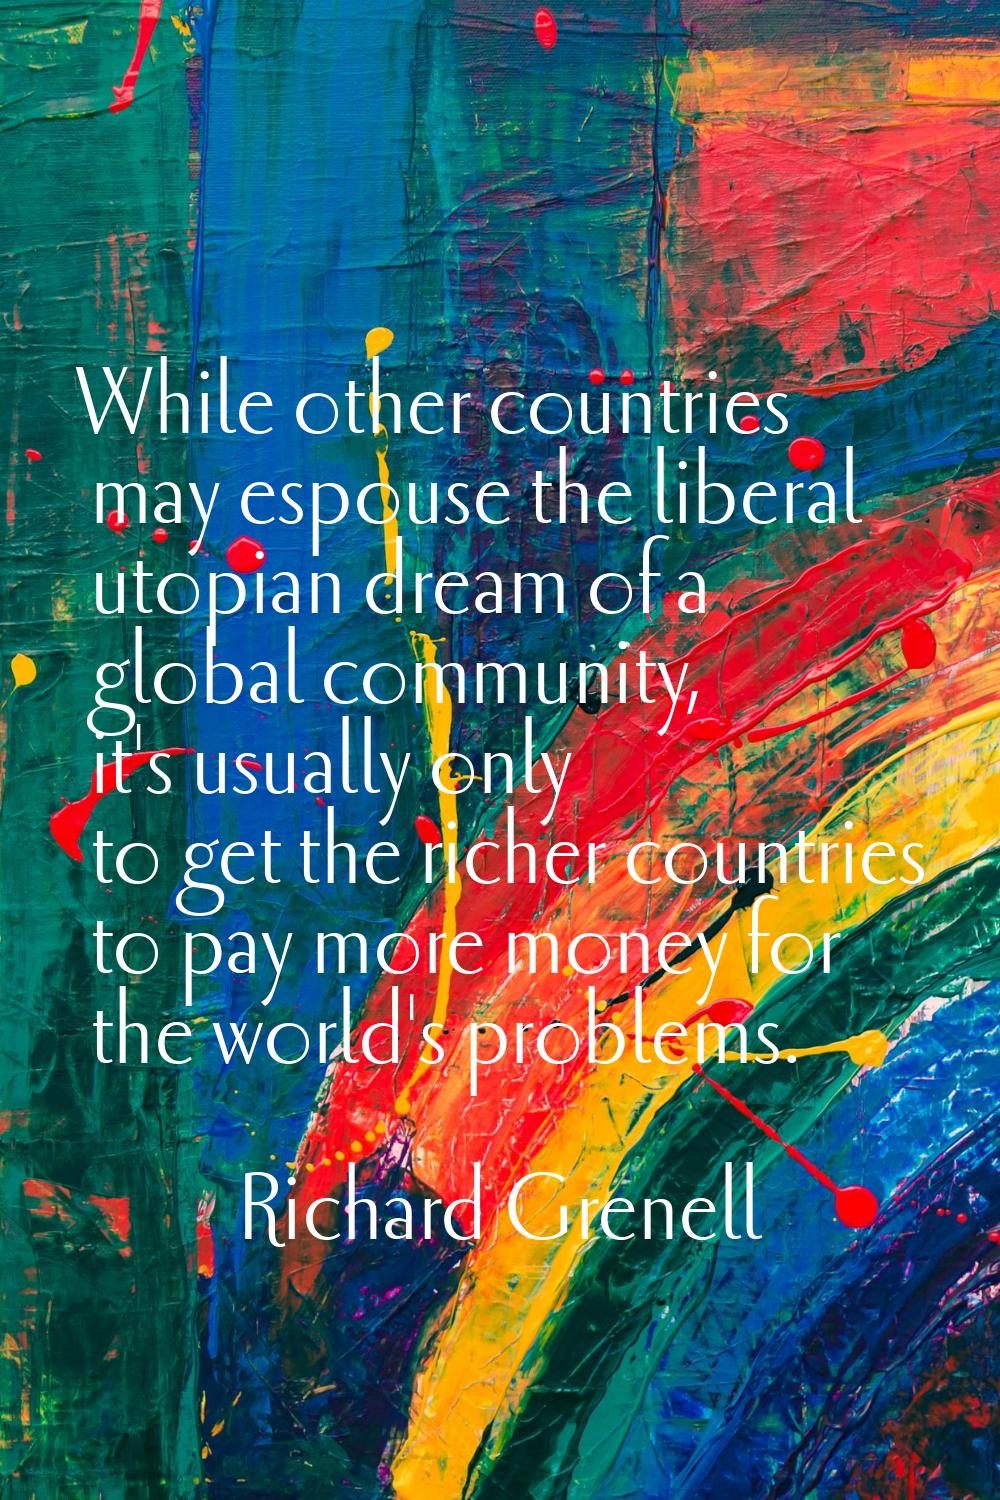 While other countries may espouse the liberal utopian dream of a global community, it's usually onl